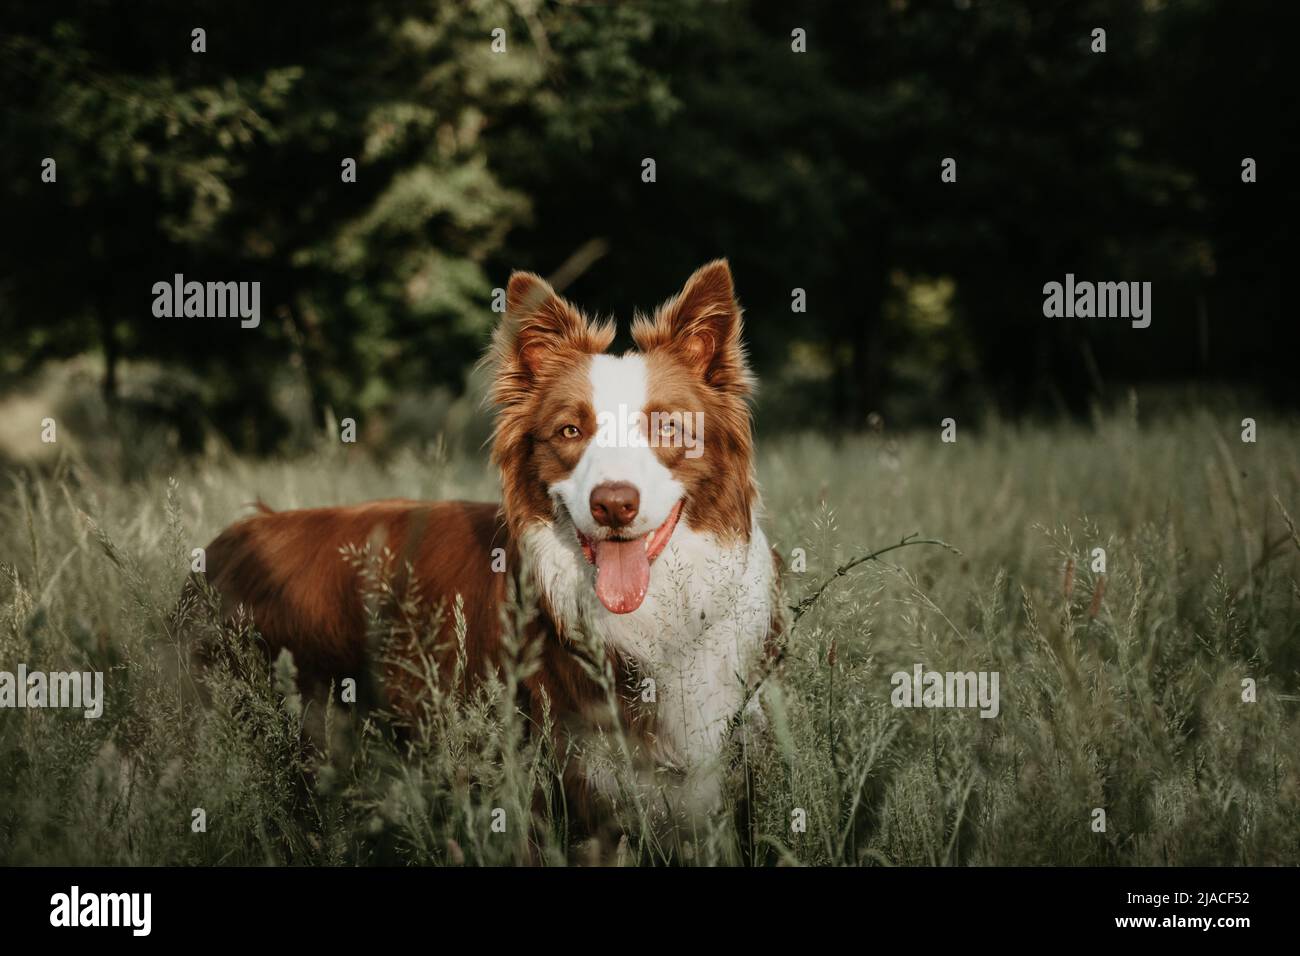 Beautiful Portrait Dog Breed Border Collie On The Brown Ground With His  Stick Stock Photo - Download Image Now - iStock